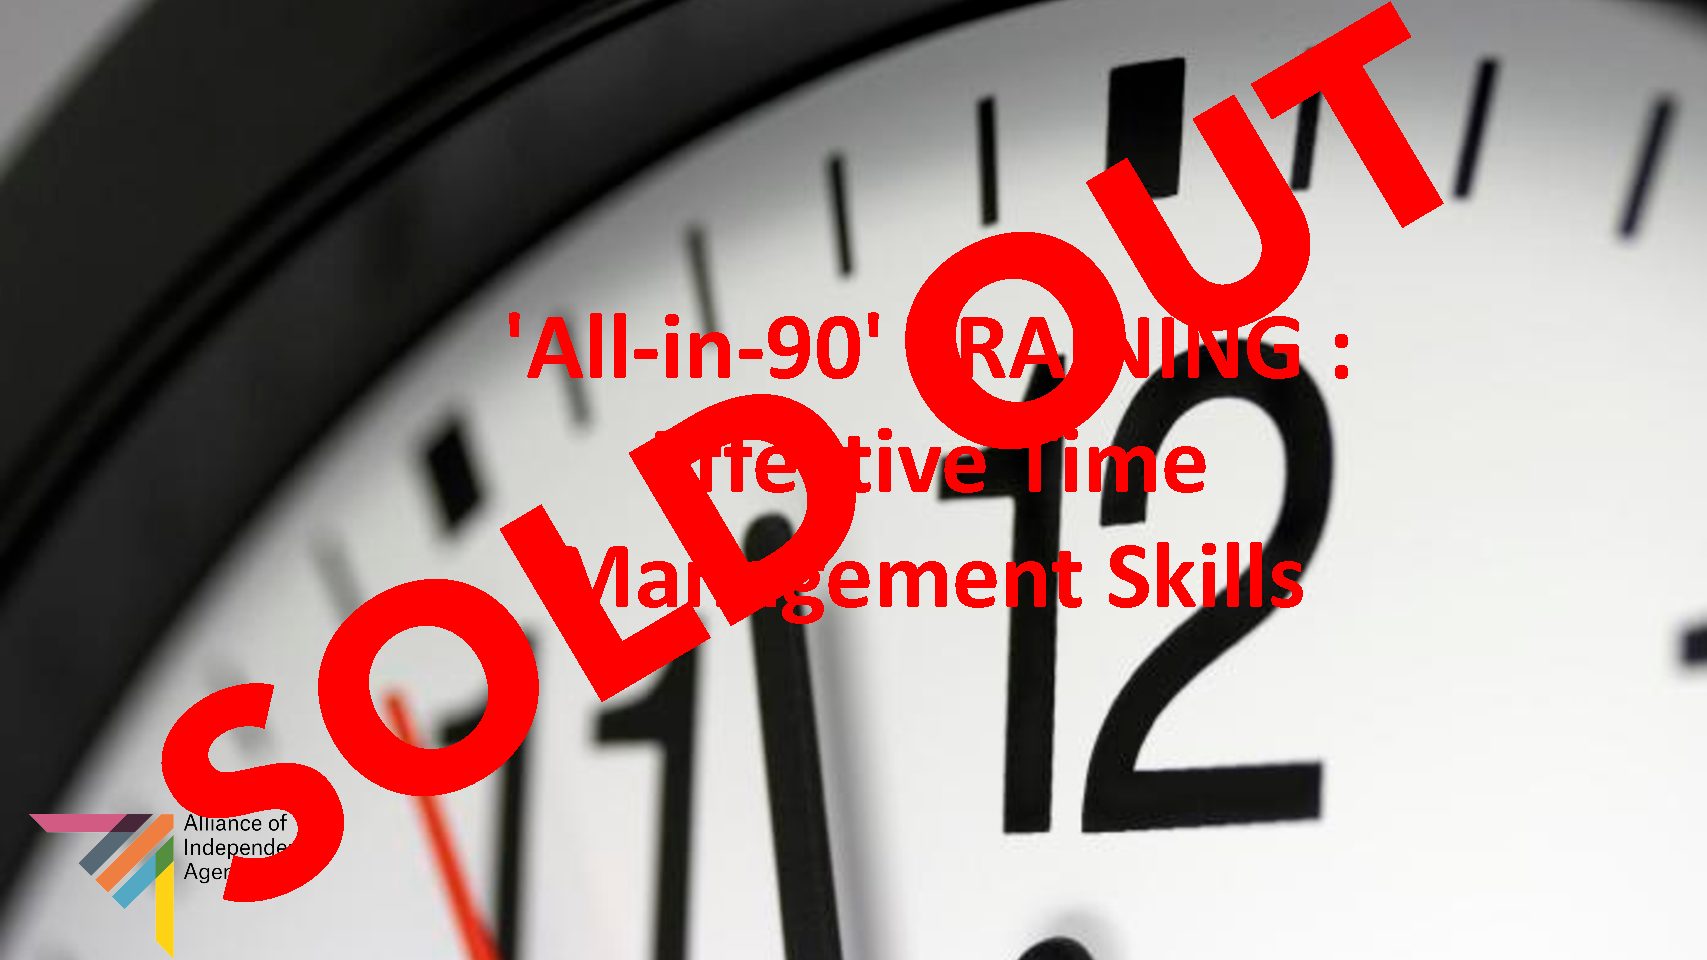 'All-in-90' TRAINING : Effective Time Management Skills